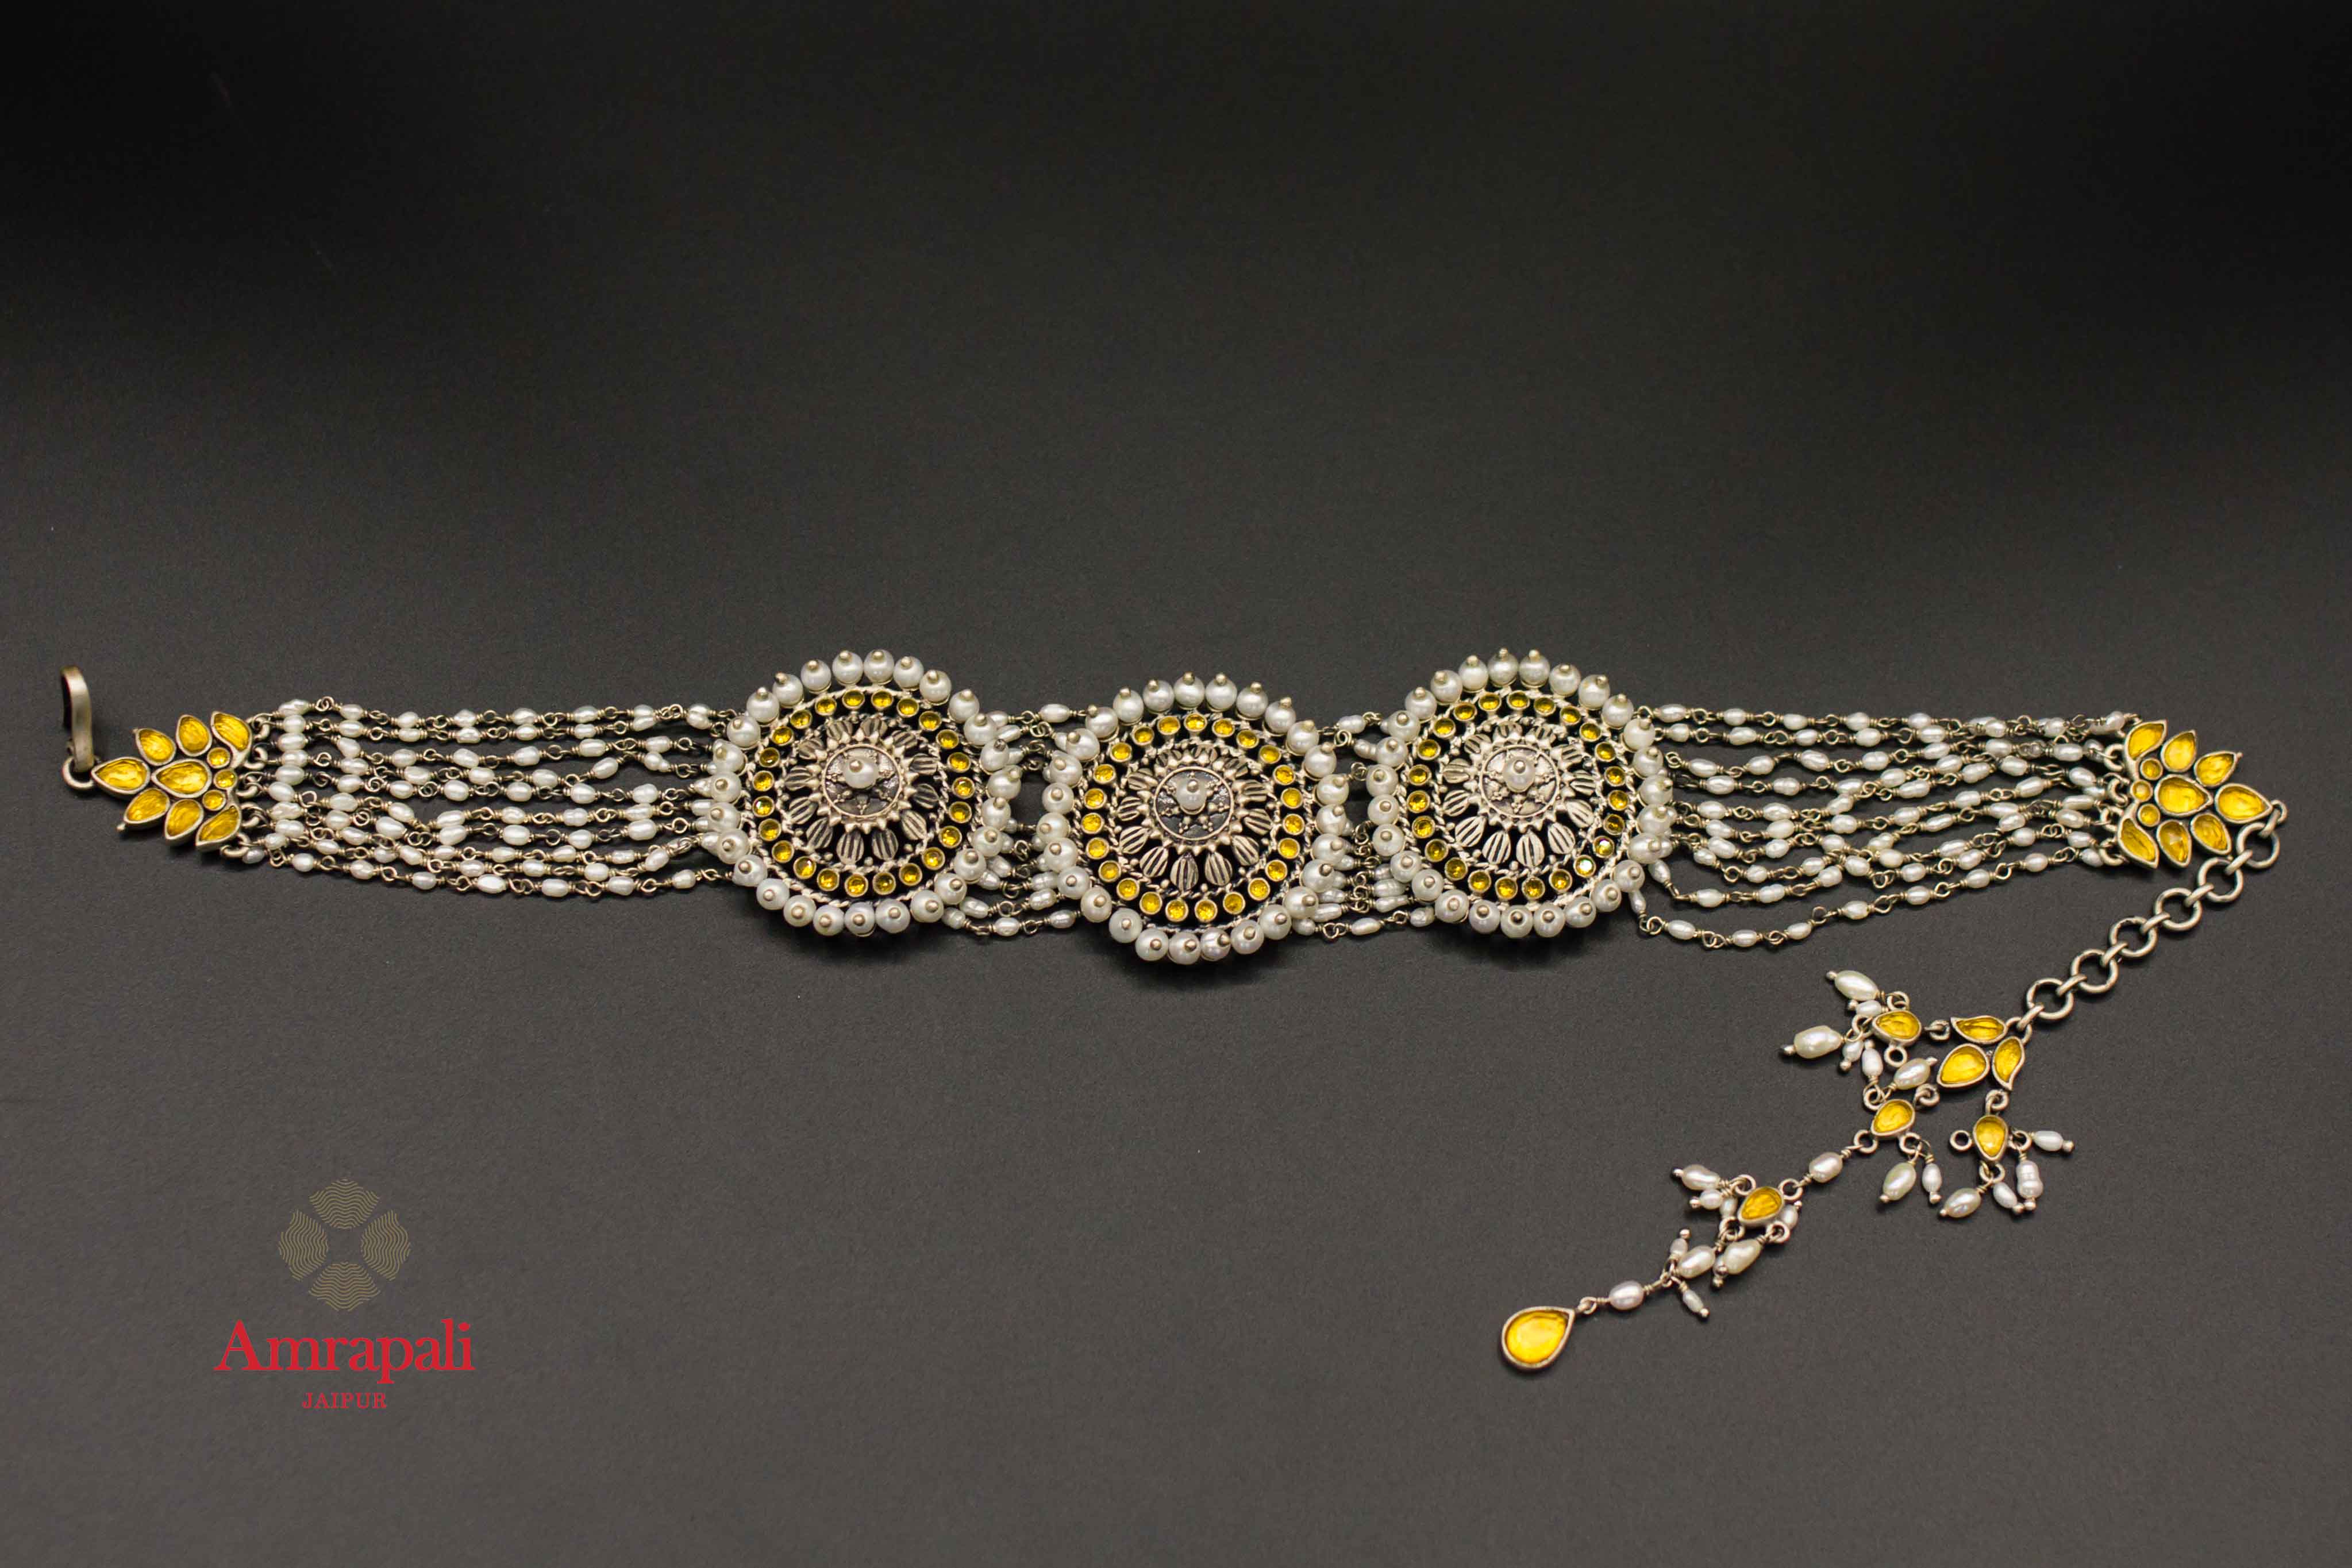 Shop Amrapali silver gold plated pearl chakra choker necklace online in USA. Raise your ethnic style quotient on special occasions with exquisite Indian jewelry from Pure Elegance Indian clothing store in USA. Enhance your Indian look with silver gold plated jewelry, necklaces, fashion jewelry available online.-flatlay